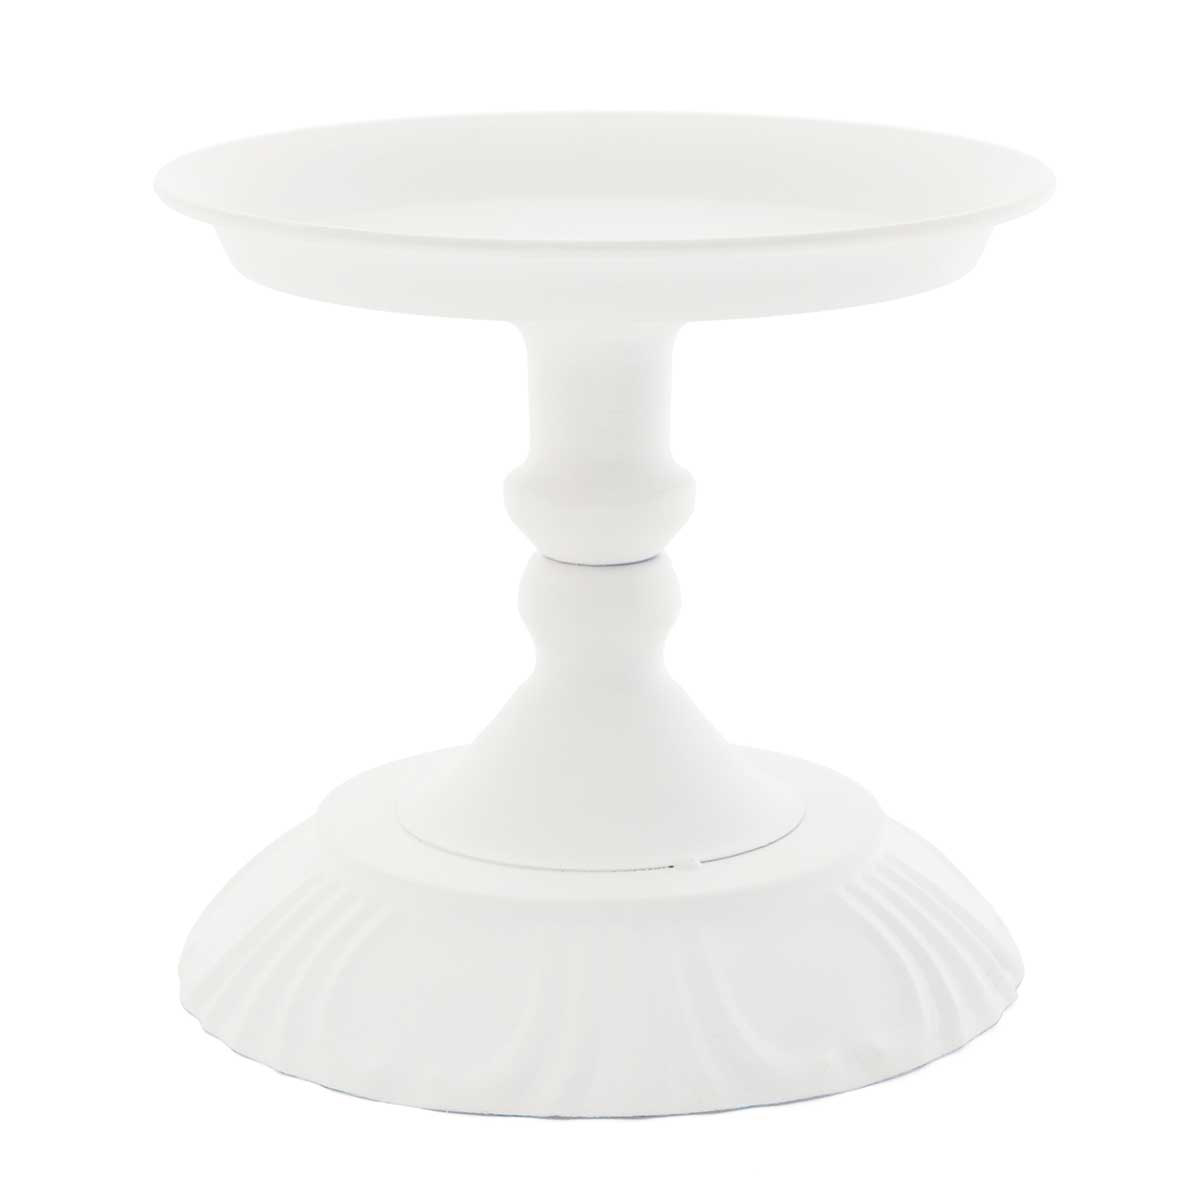 DISPLAY TRAY/CANDLEHOLDER 6.25IN X 6IN MATTE WHITE METAL